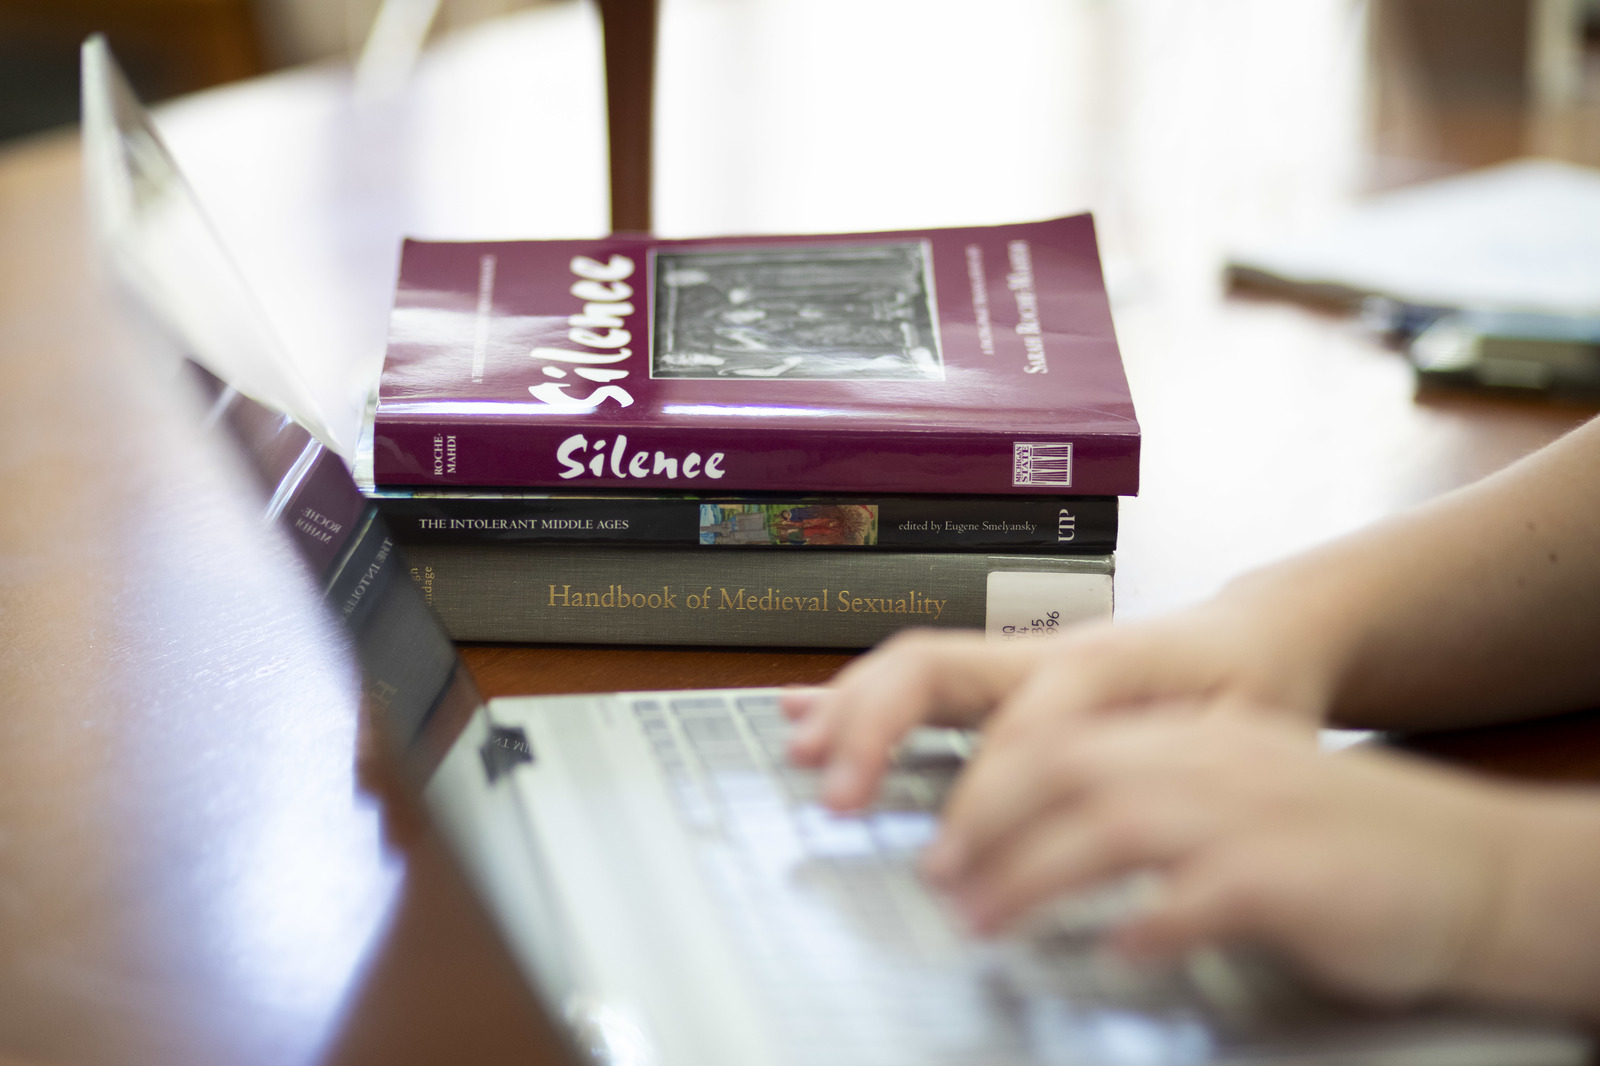 A stack of books sits on a table, visible just beyond two hands typing on a laptop keyboard